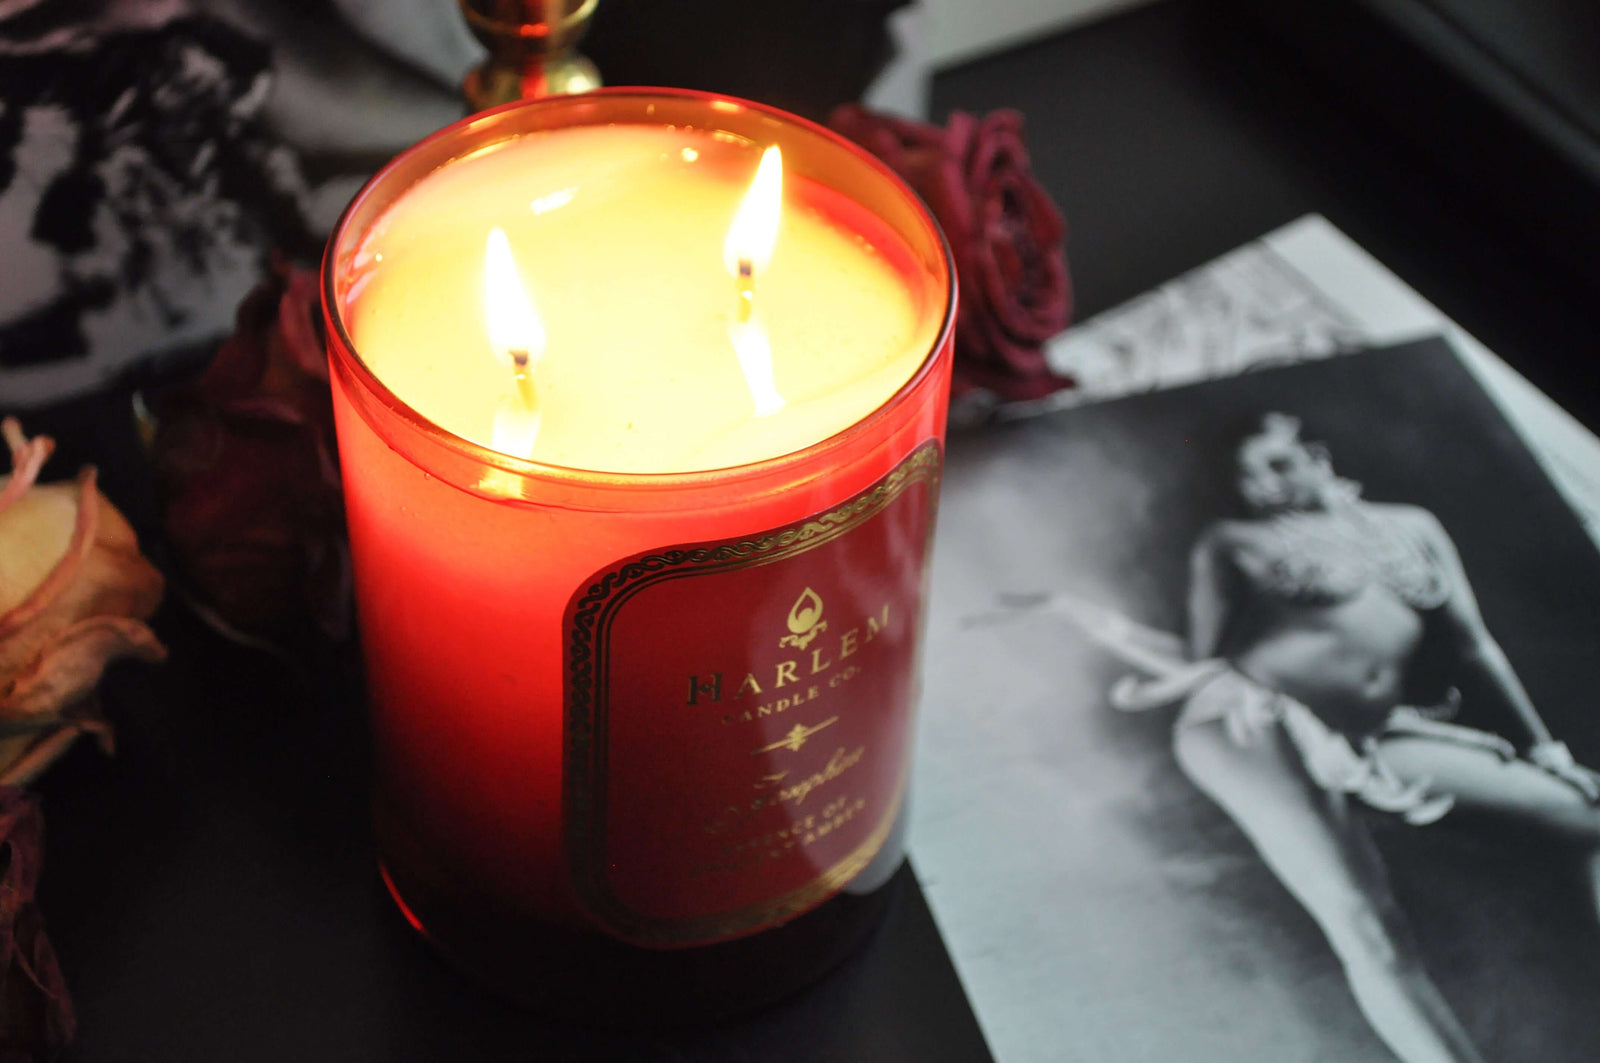 This is an image of our Josephine candle, illuminated next to a black-and-white picture of Josephine Baker